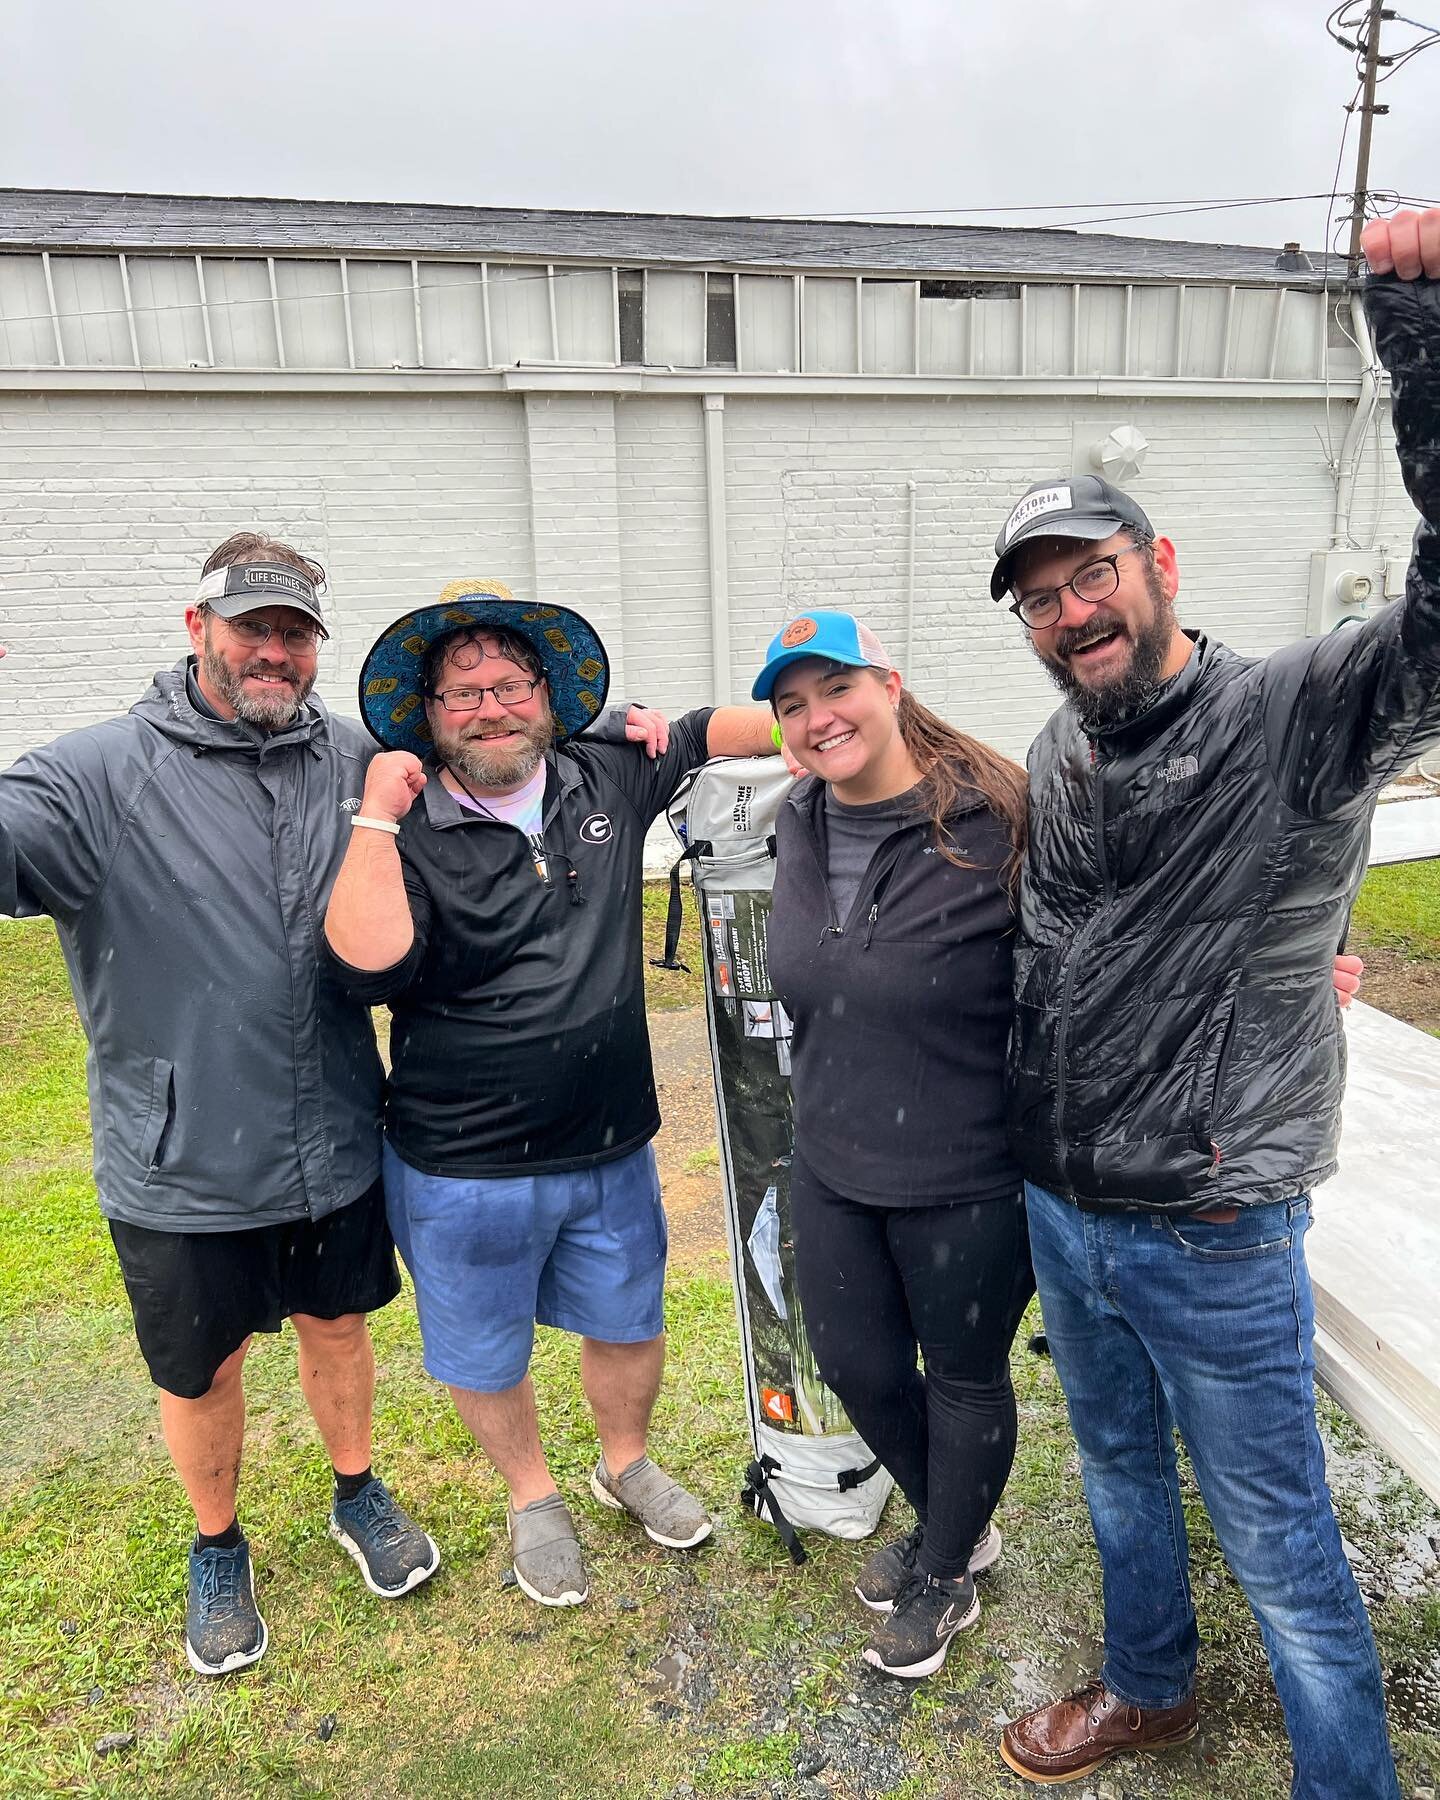 Our United reps were a ray of sunshine on a very rainy and cold day at the Hot Glass Craft Beer Fest today. Americus, despite everything, showed out like it always does.

#americus #pretoriafieldsbrewing #craftbeerlove #rainorshine #georgia